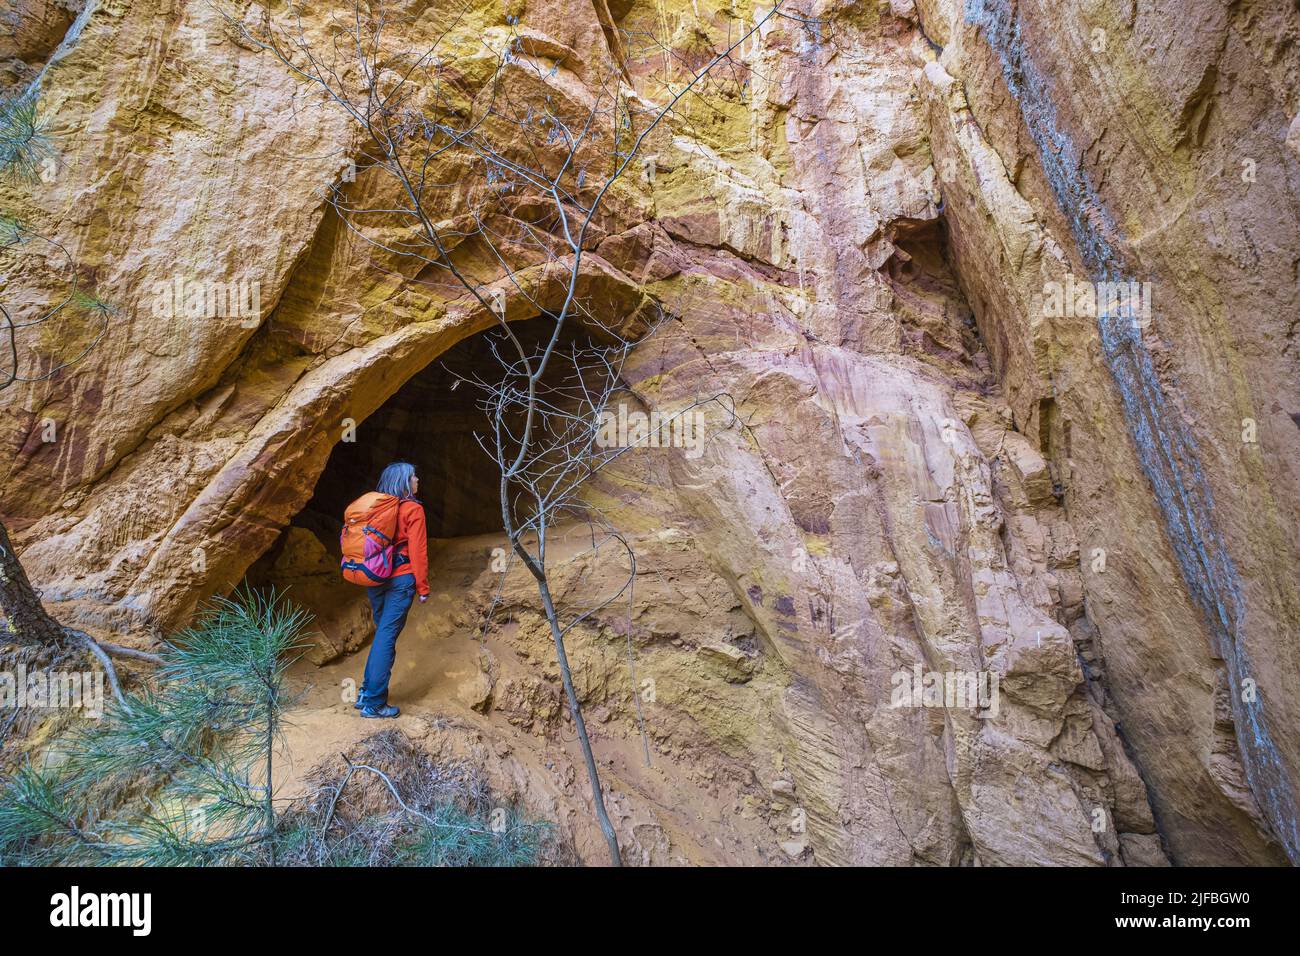 France, Vaucluse, Luberon regional nature park, Gargas, hike in a former ocher quarry Stock Photo